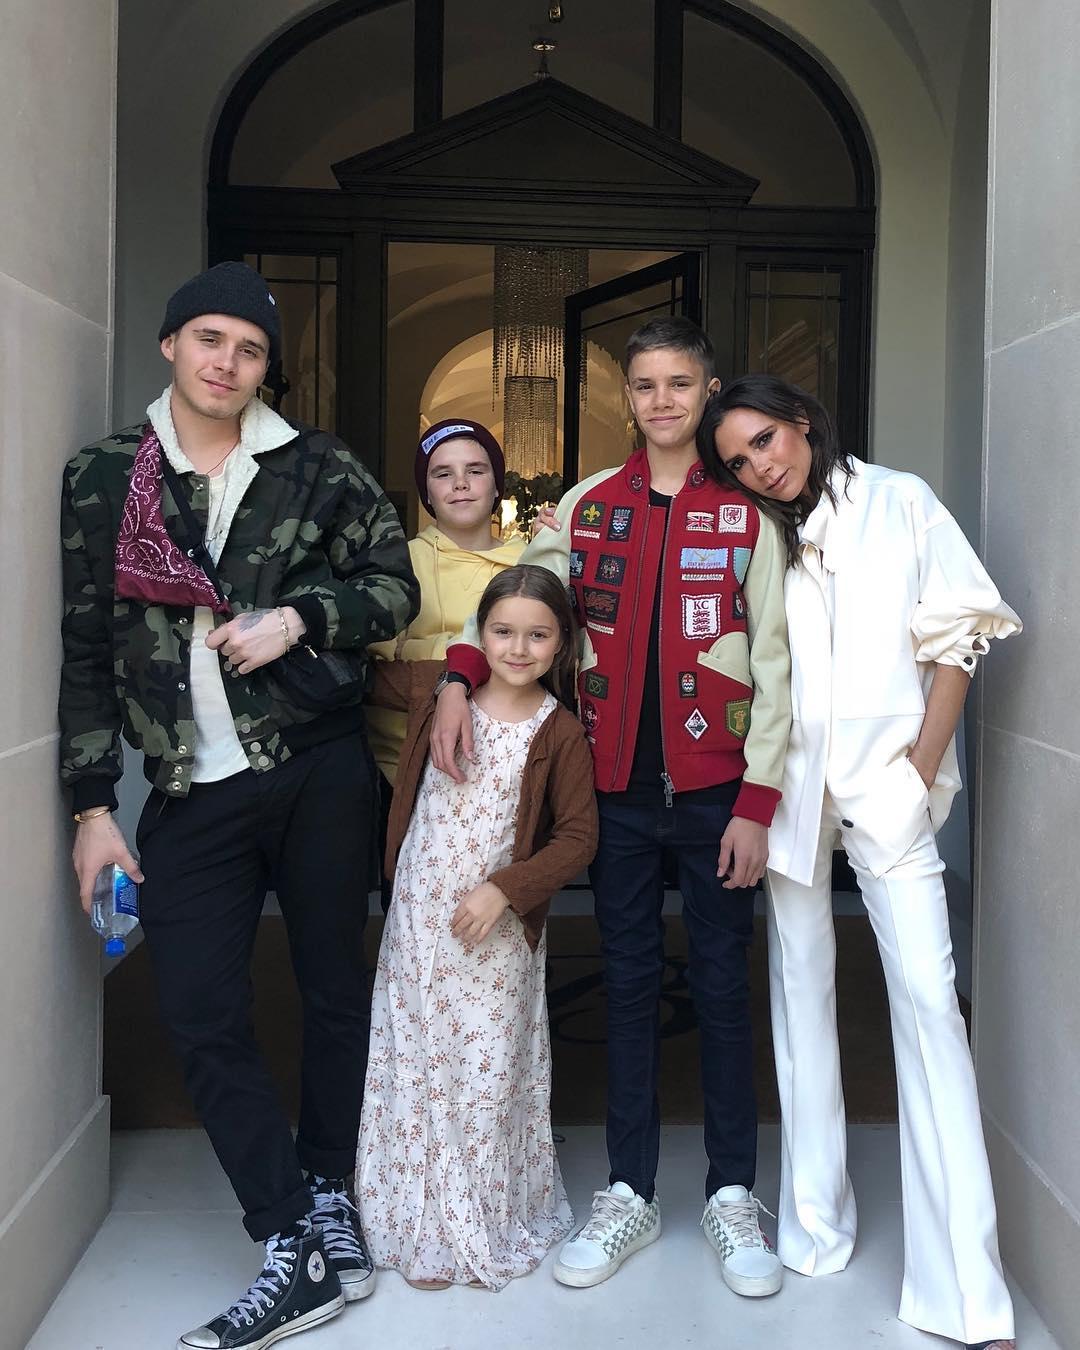 David Beckham Children: What Are They All Up To?